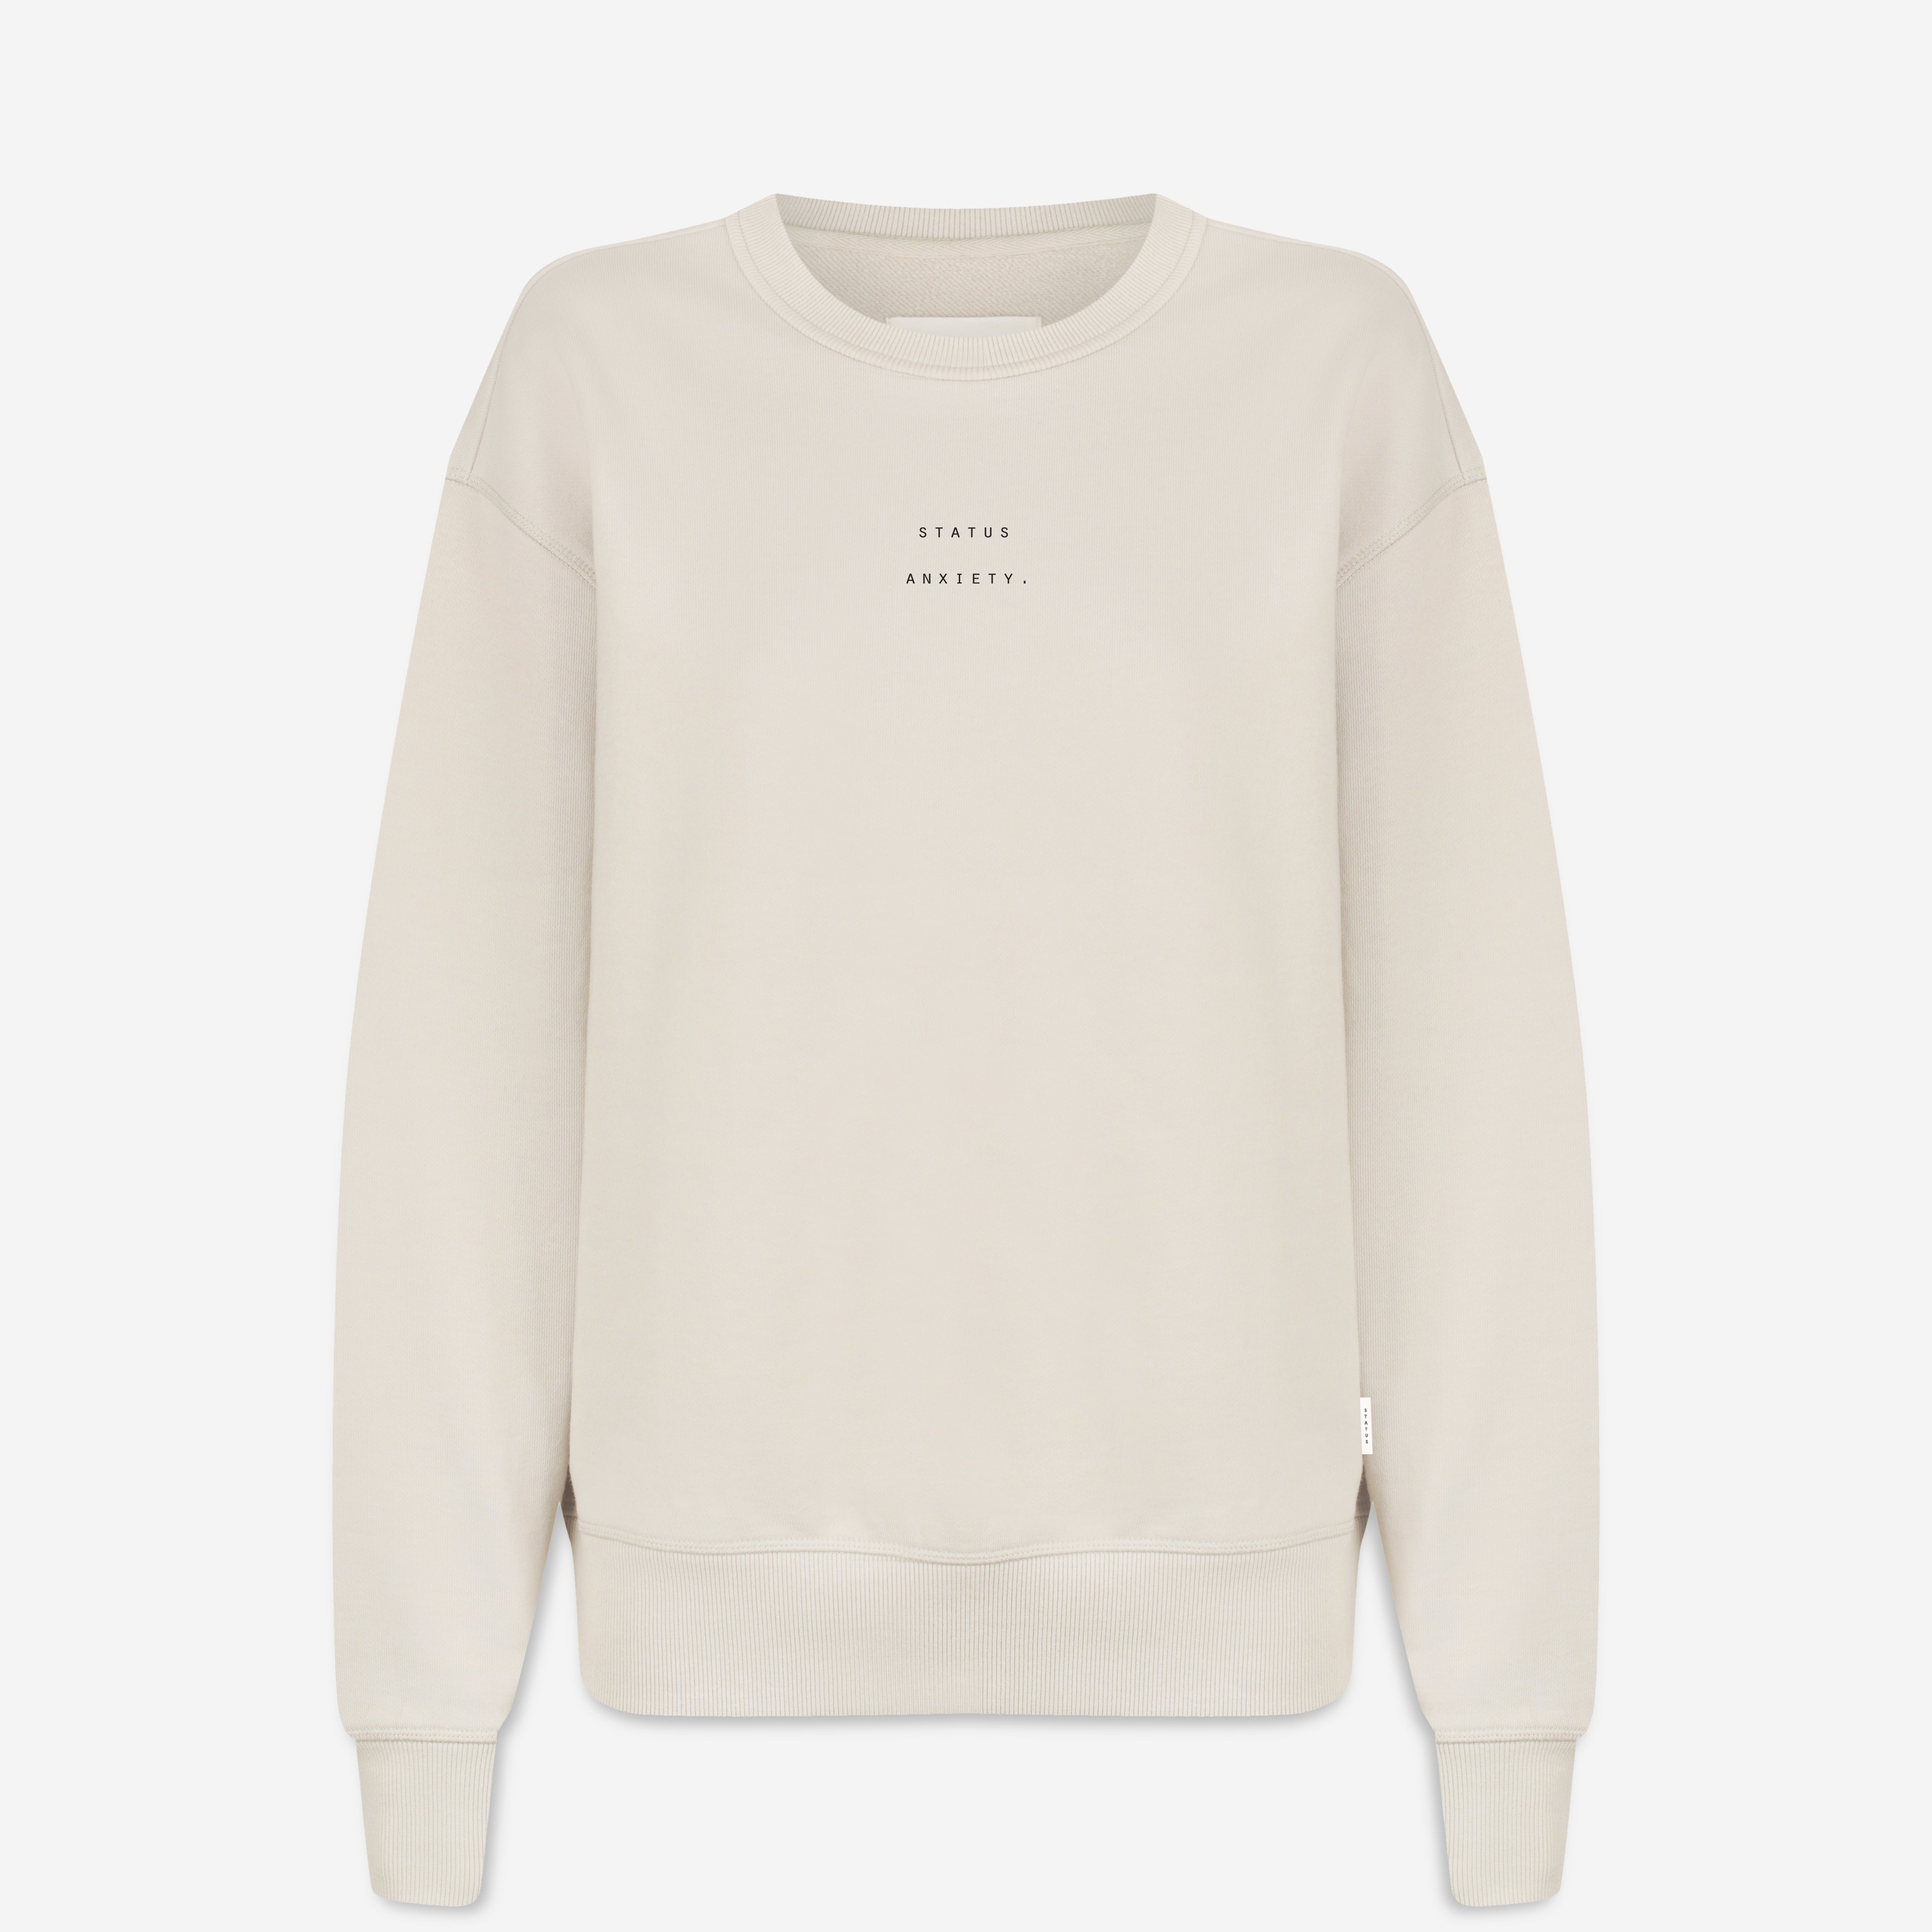 Could Be Nice - Logo - Women's Classic Crew / Dove Grey